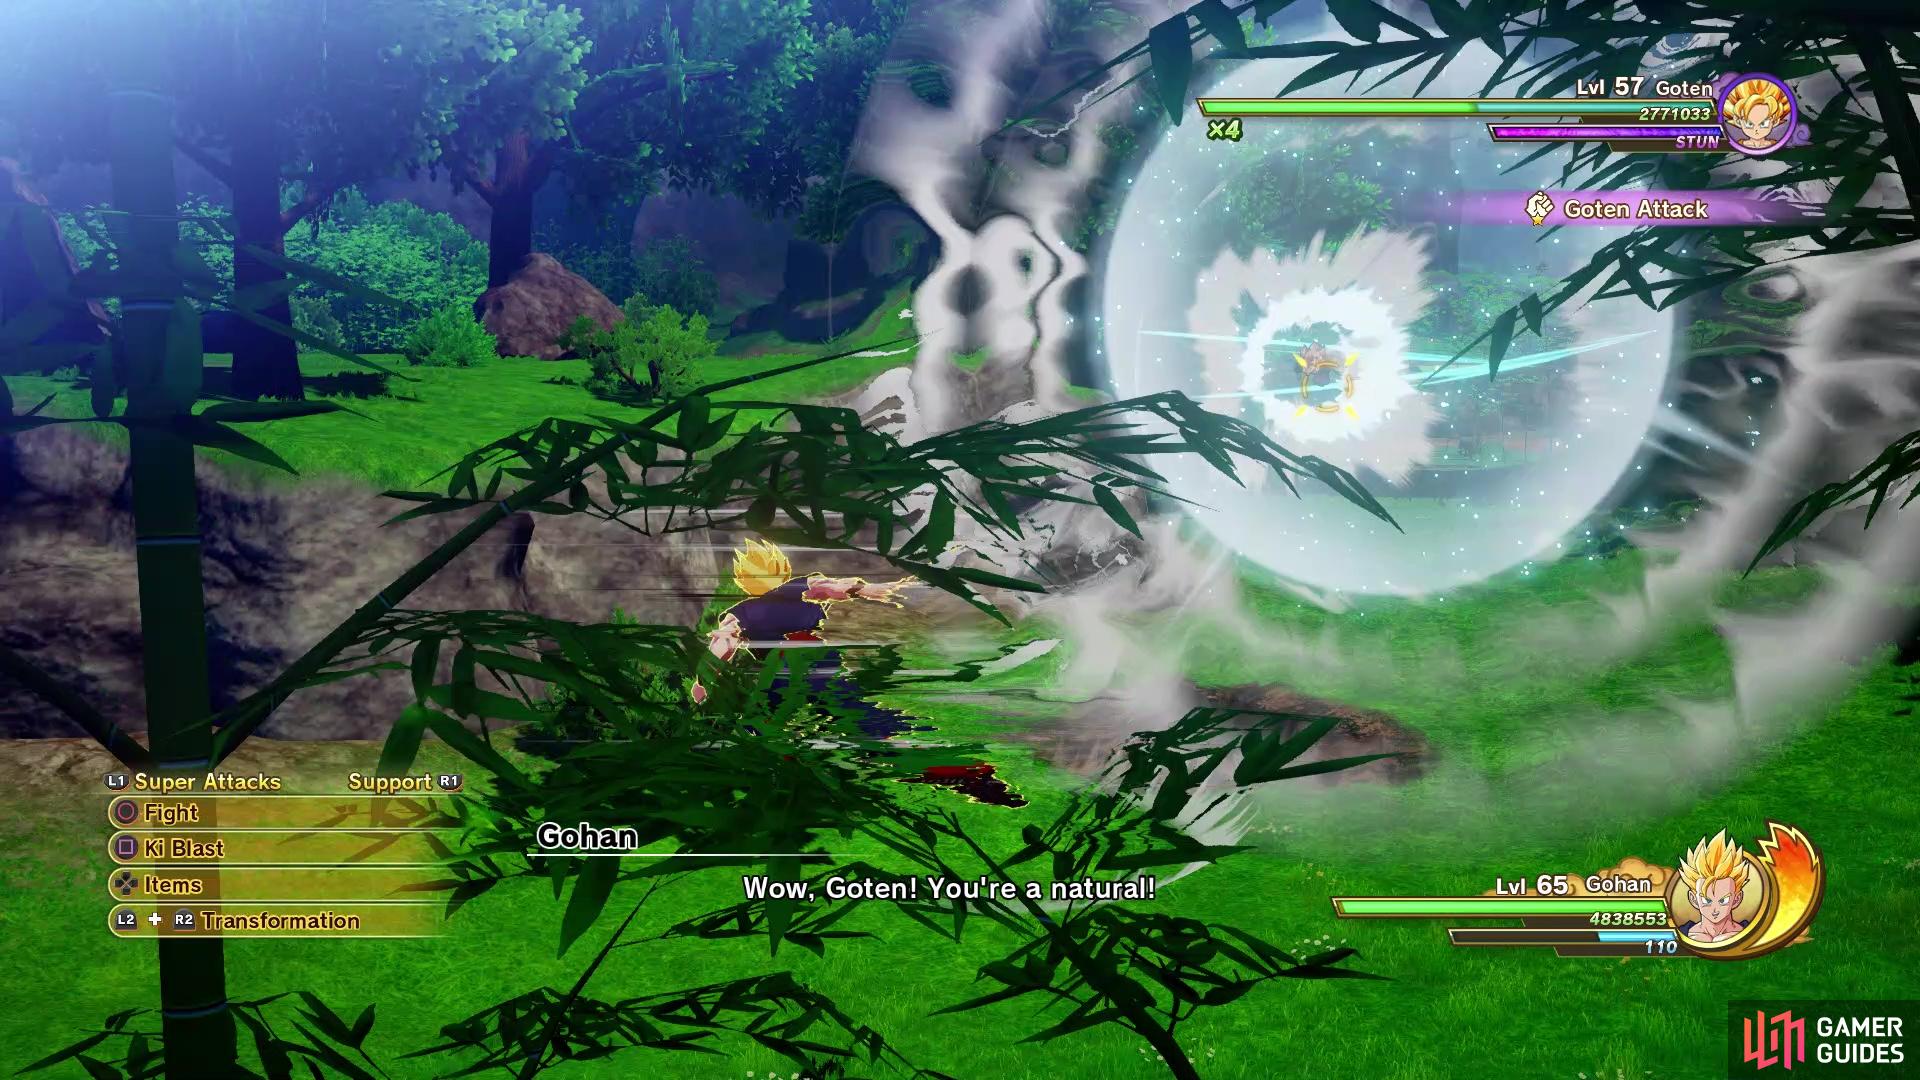 Goten's only move is to charge at you, which is easy to block/dodge